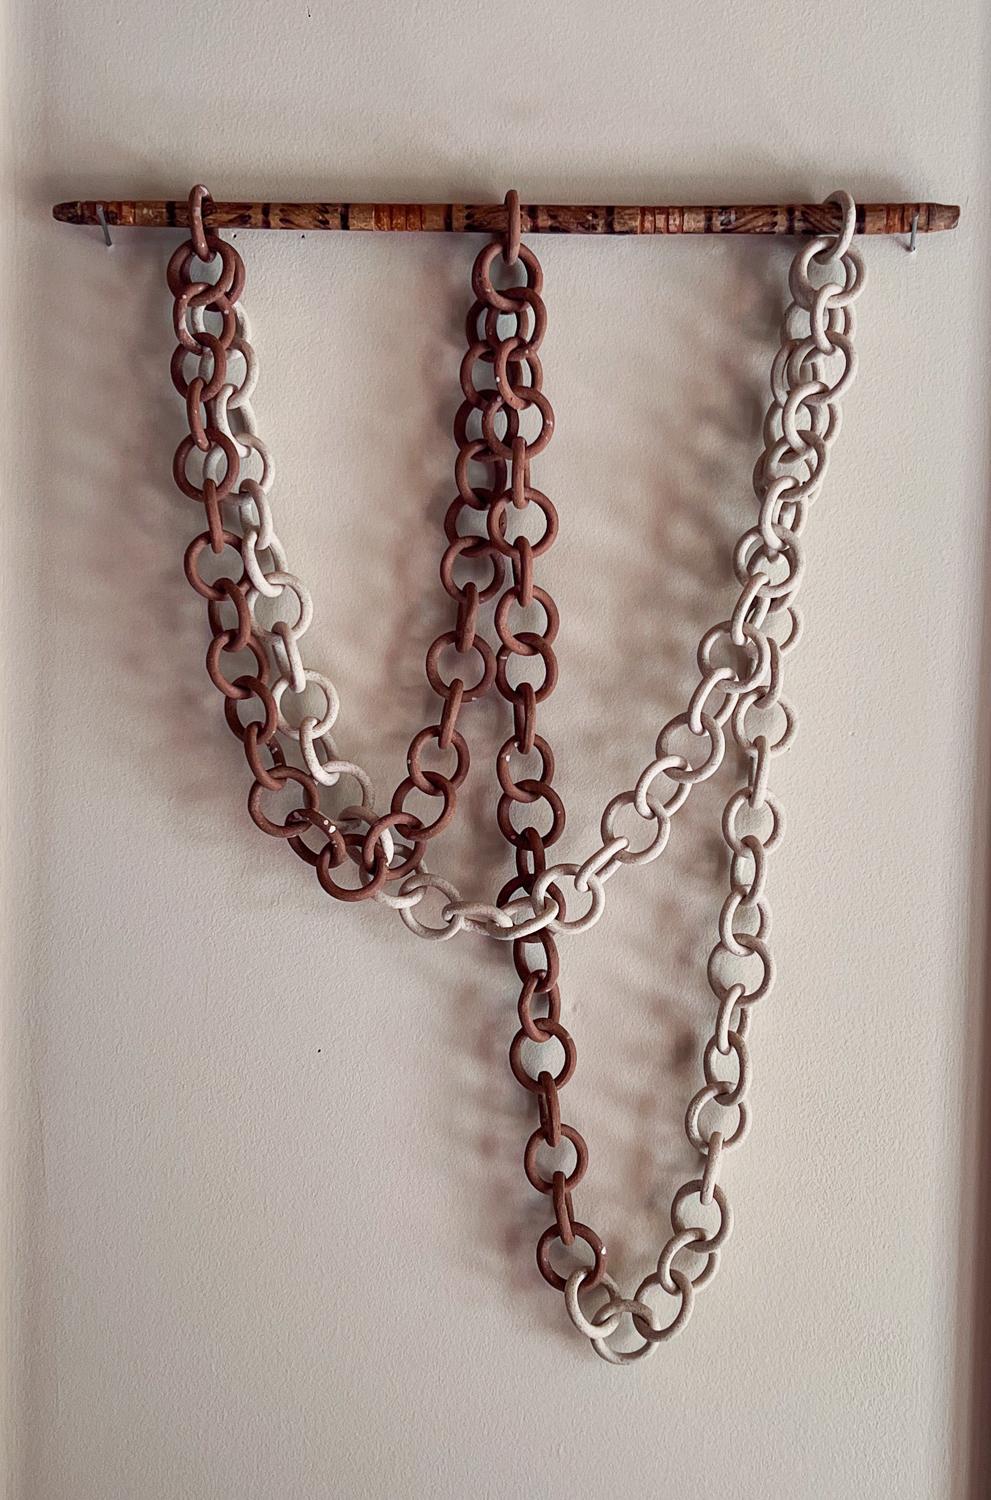 Contemporary Ceramic Link Chain Sculpture and Wall Hanging For Sale